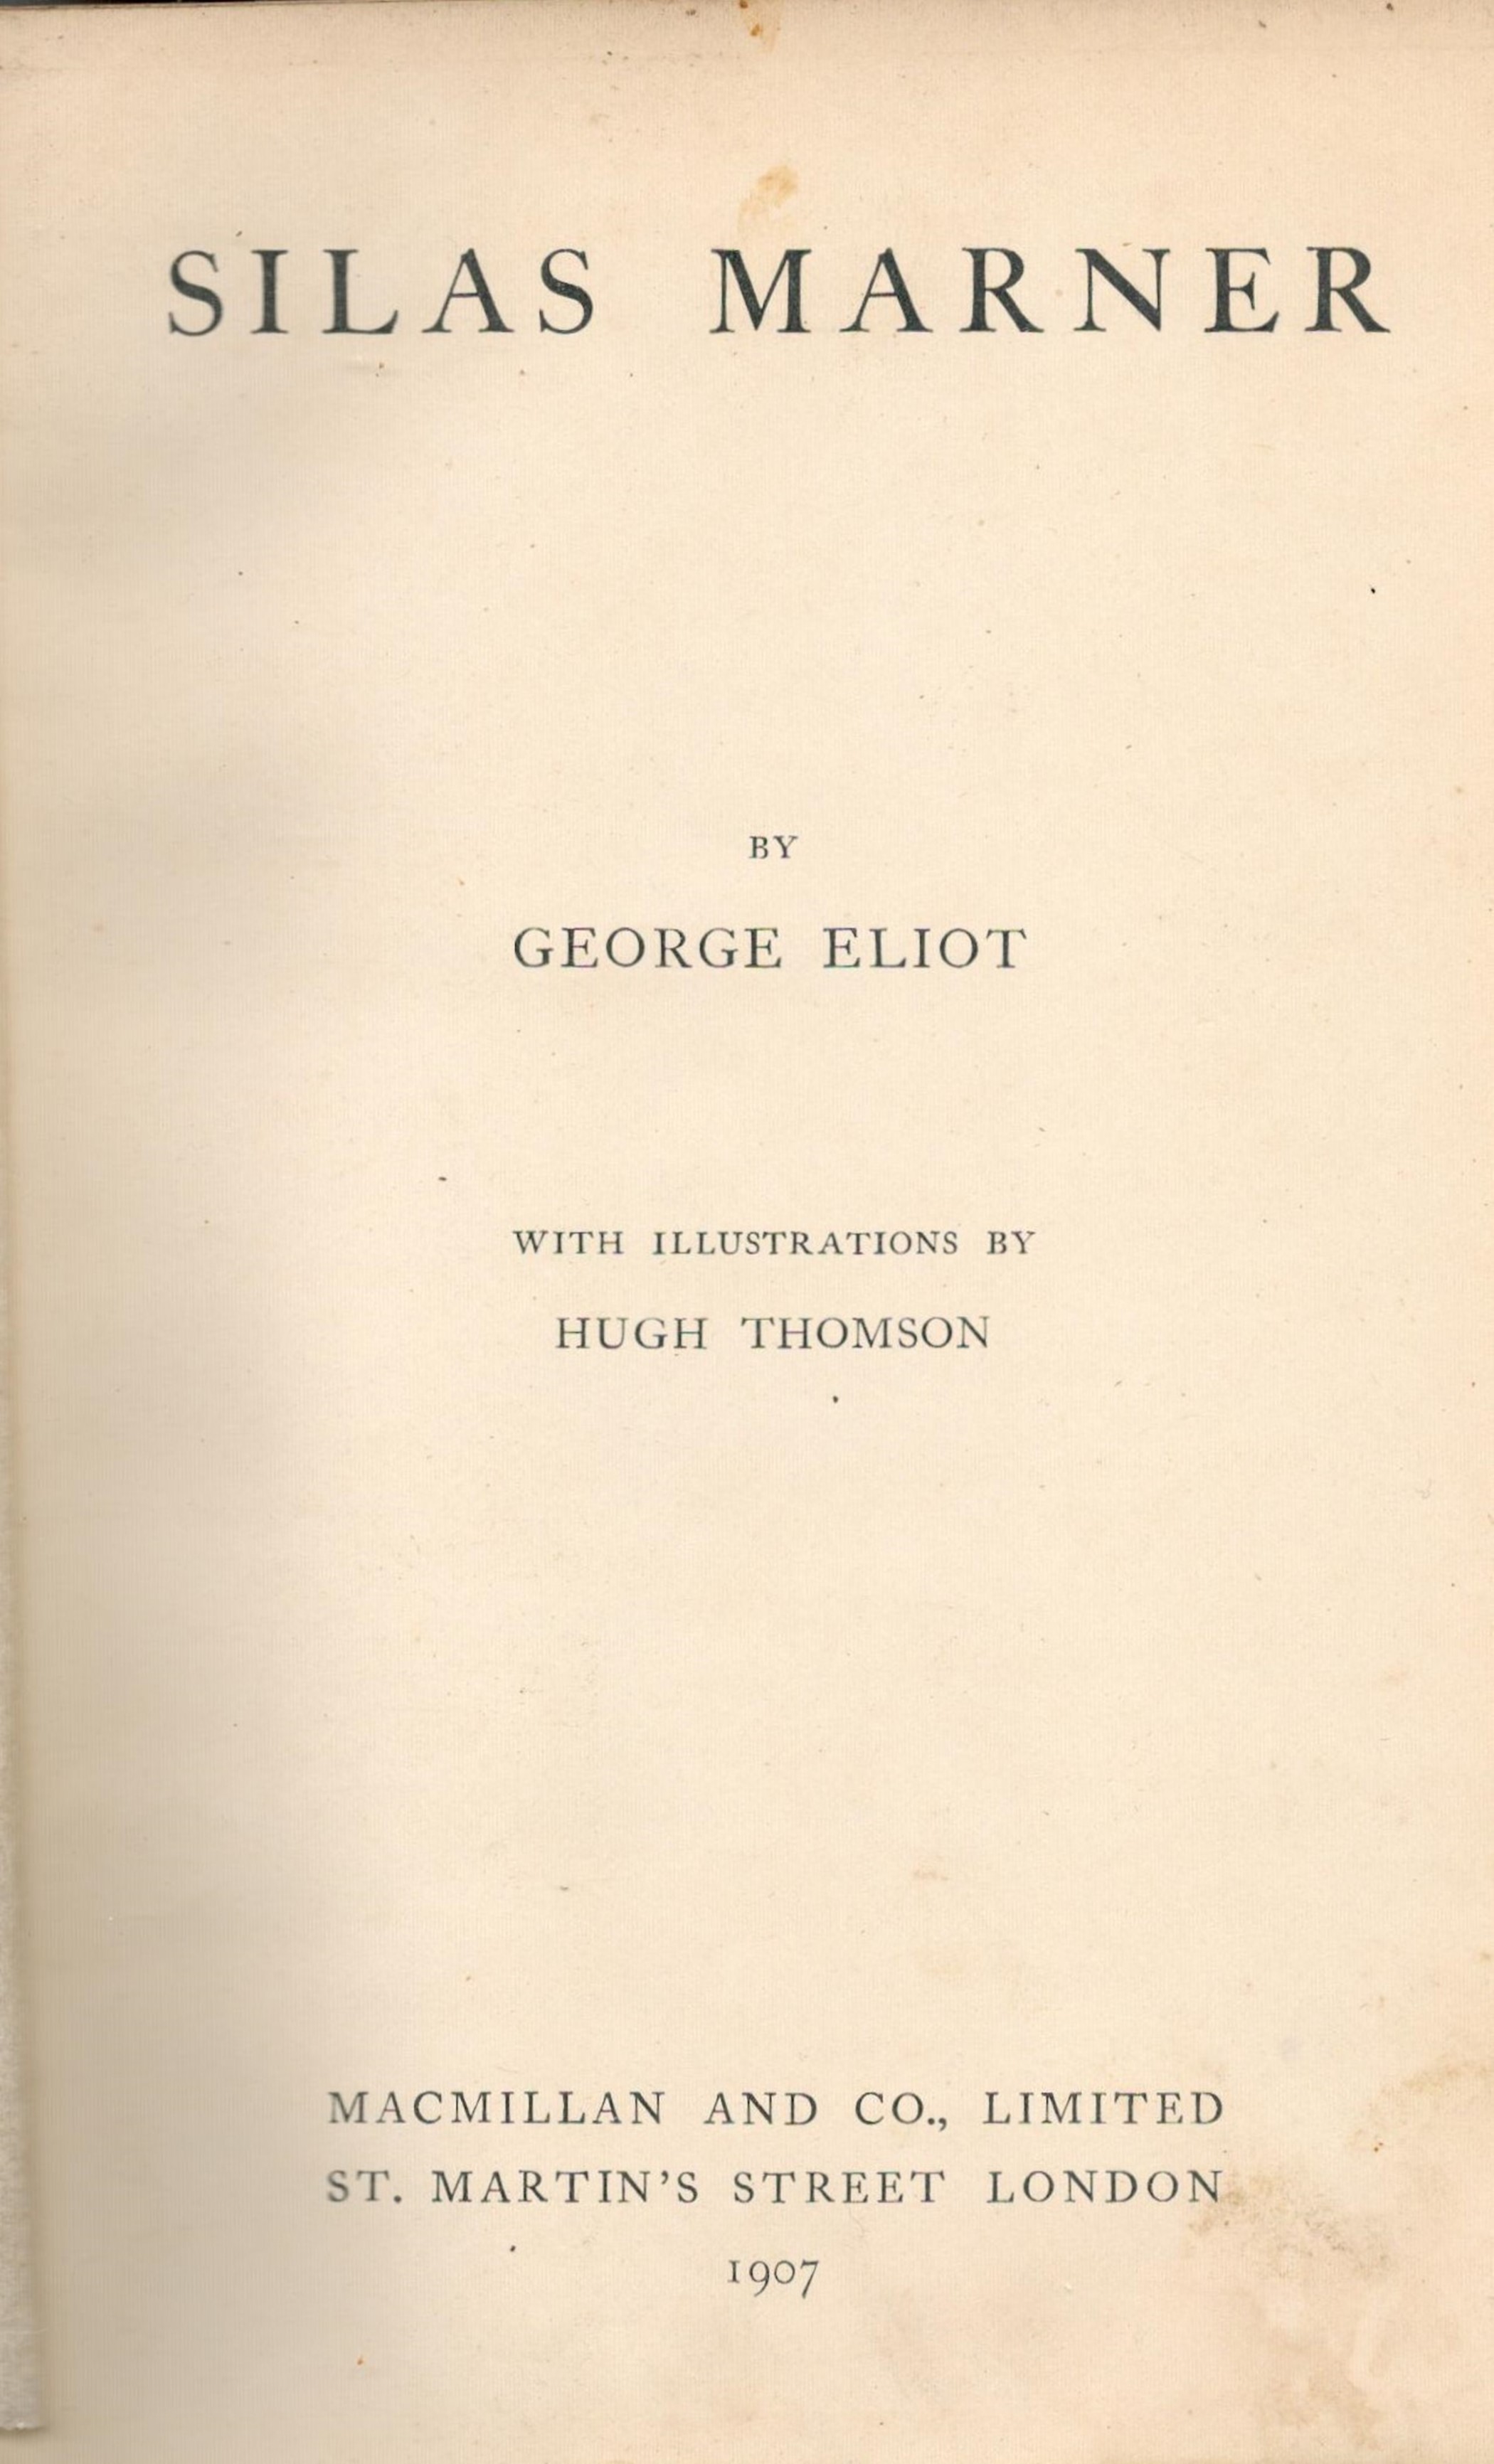 Silas Marner by George Eliot Hardback Book 1907 edition unknown published by Macmillan and Co Ltd - Image 3 of 3